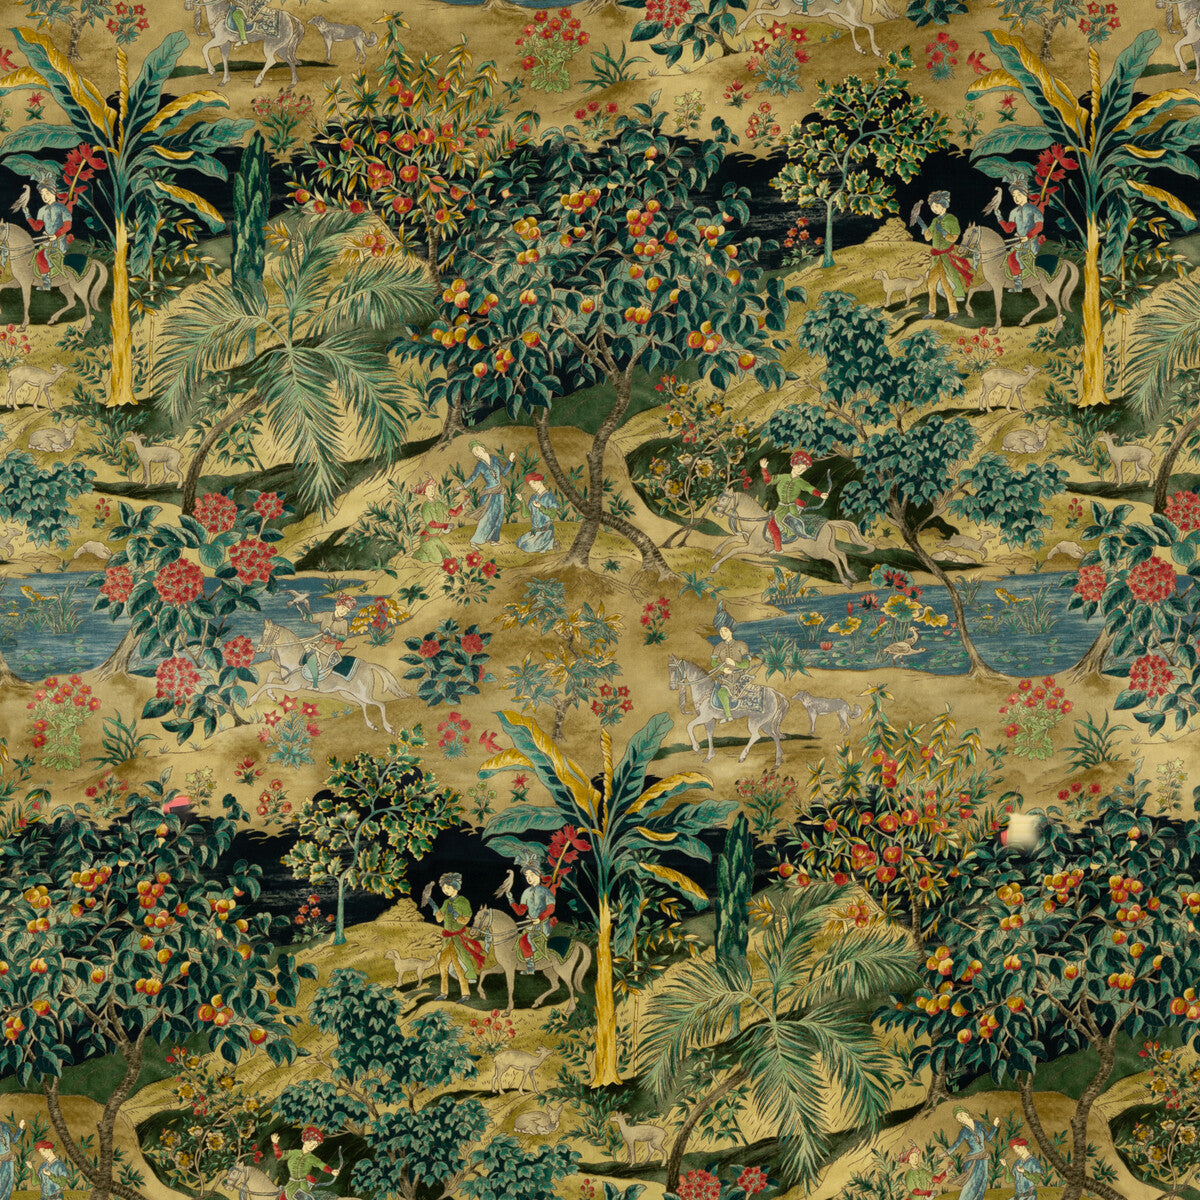 Ramayana Velvet fabric in emerald/sand color - pattern BP10832.2.0 - by G P &amp; J Baker in the Coromandel collection